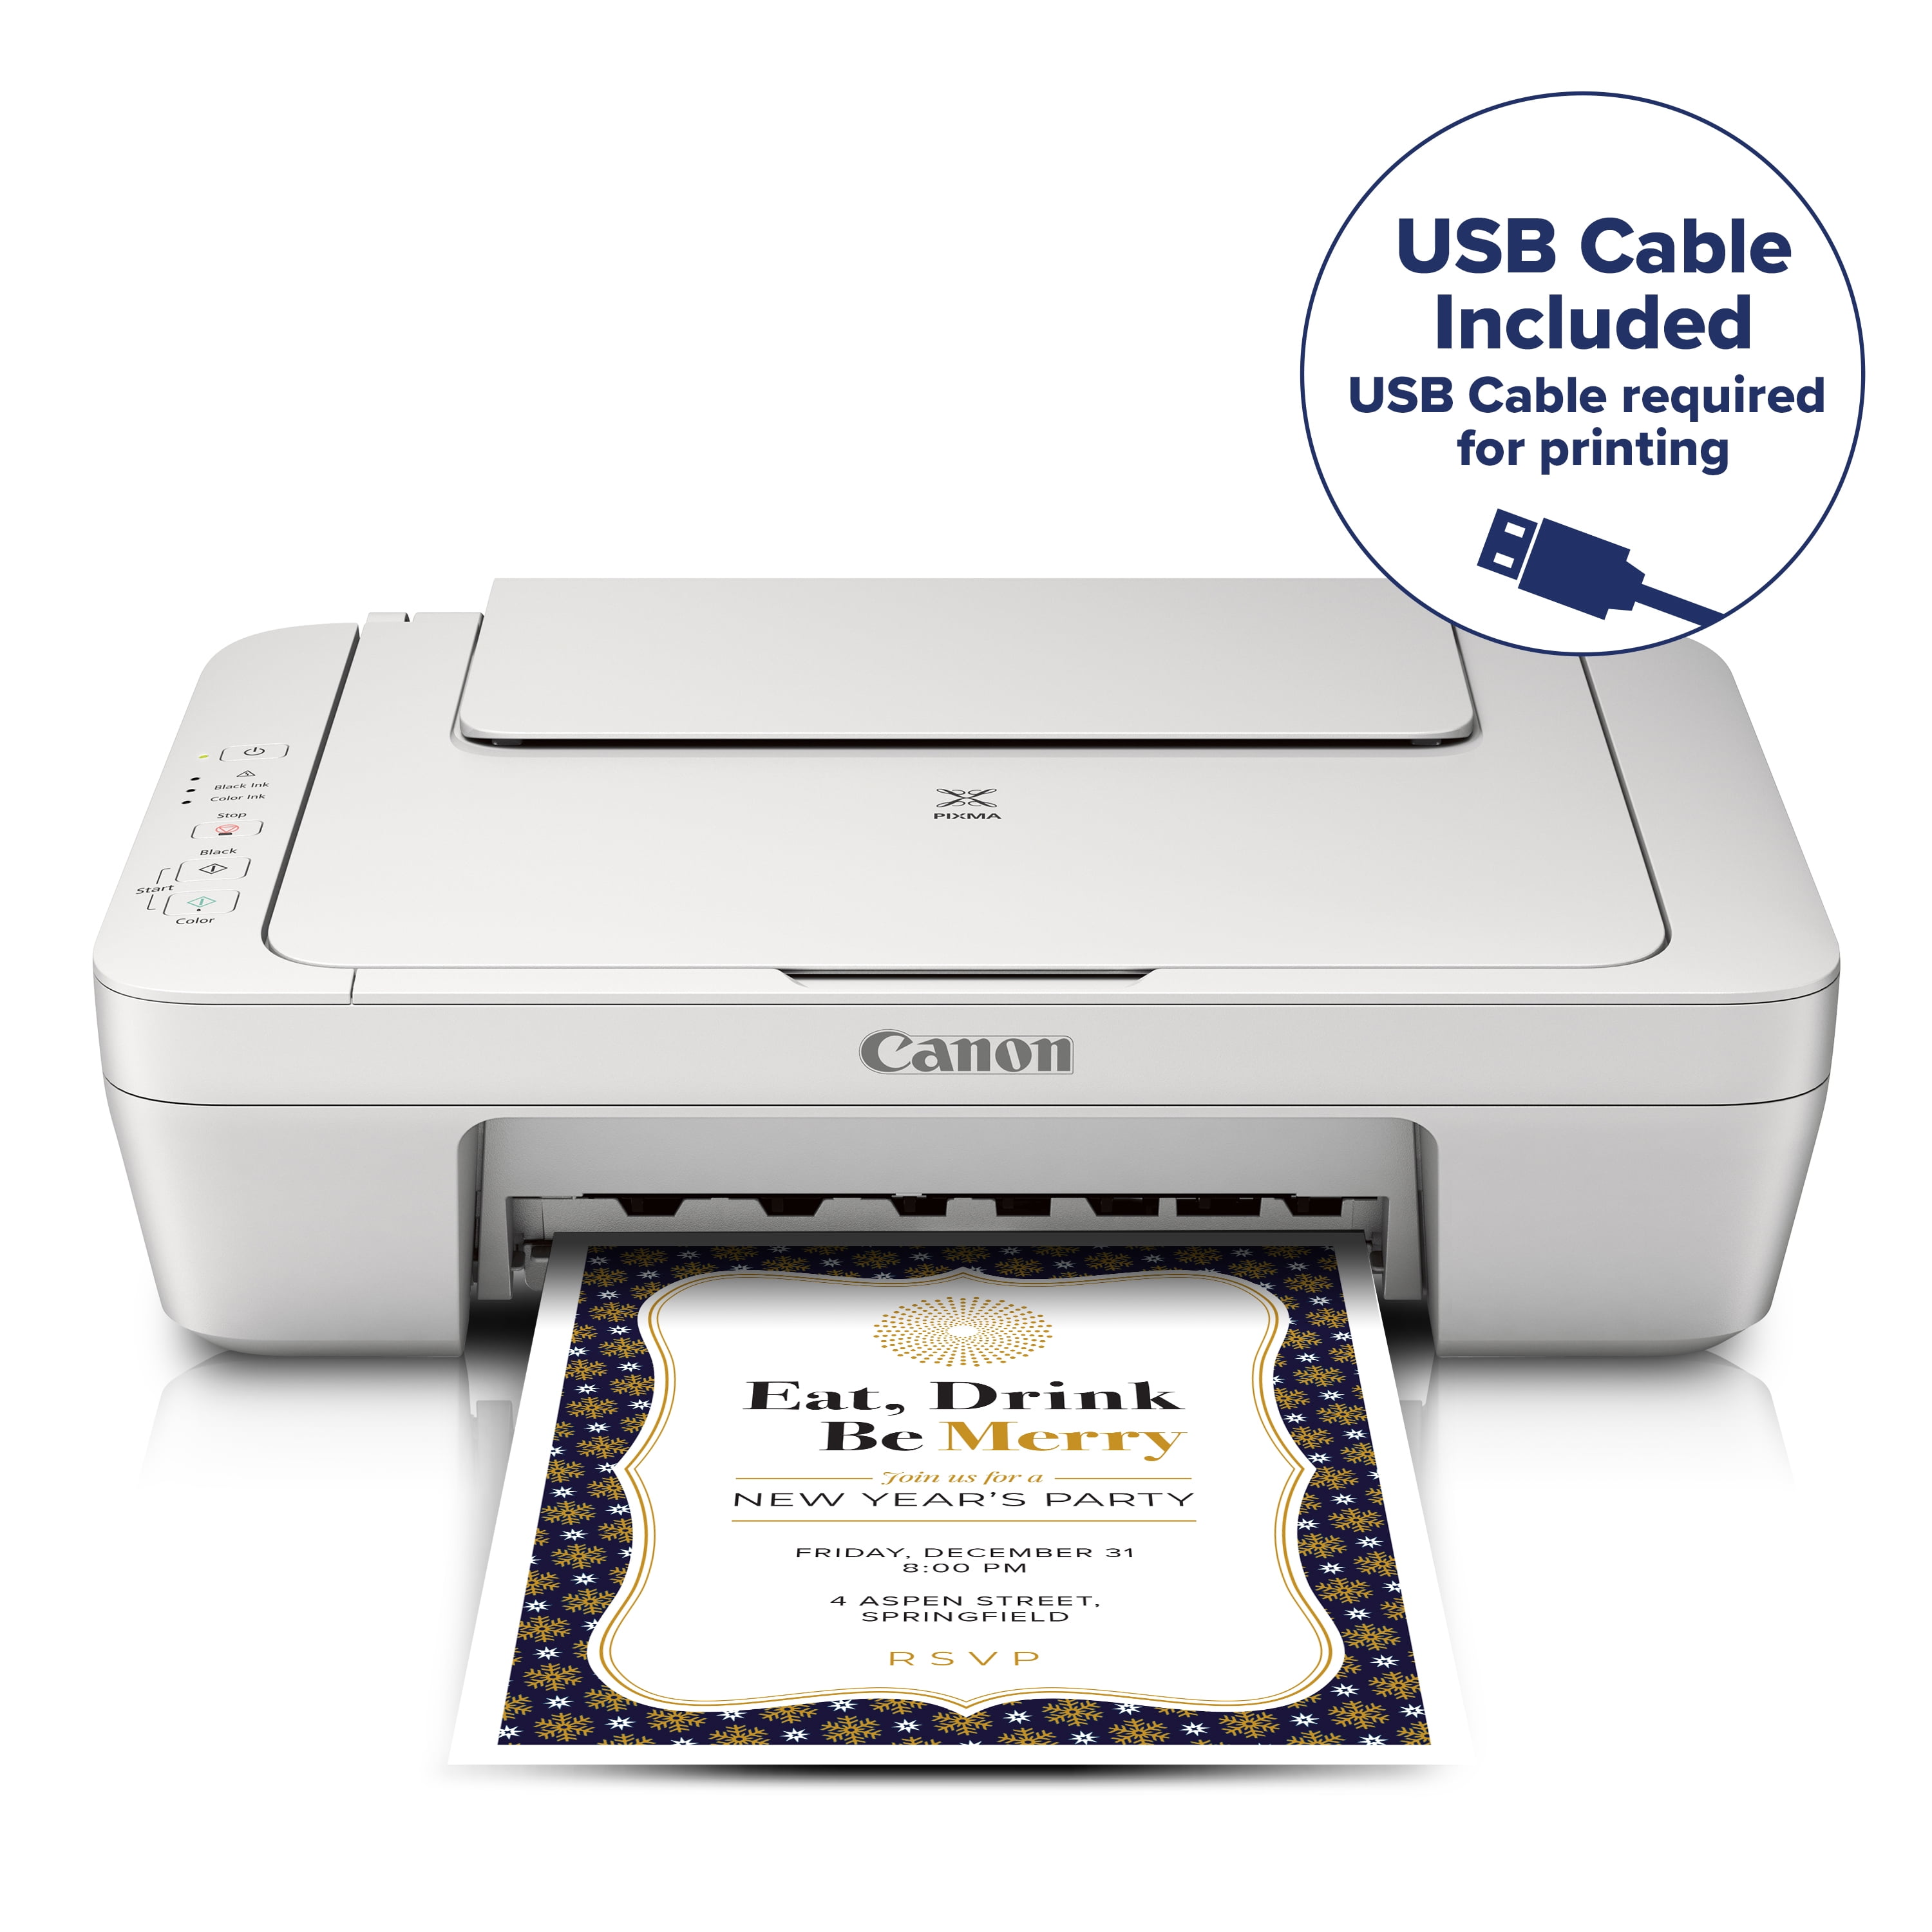 Canon PIXMA MG2522 Wired All-in-One Color Inkjet Printer [USB Cable Included], White $29.99